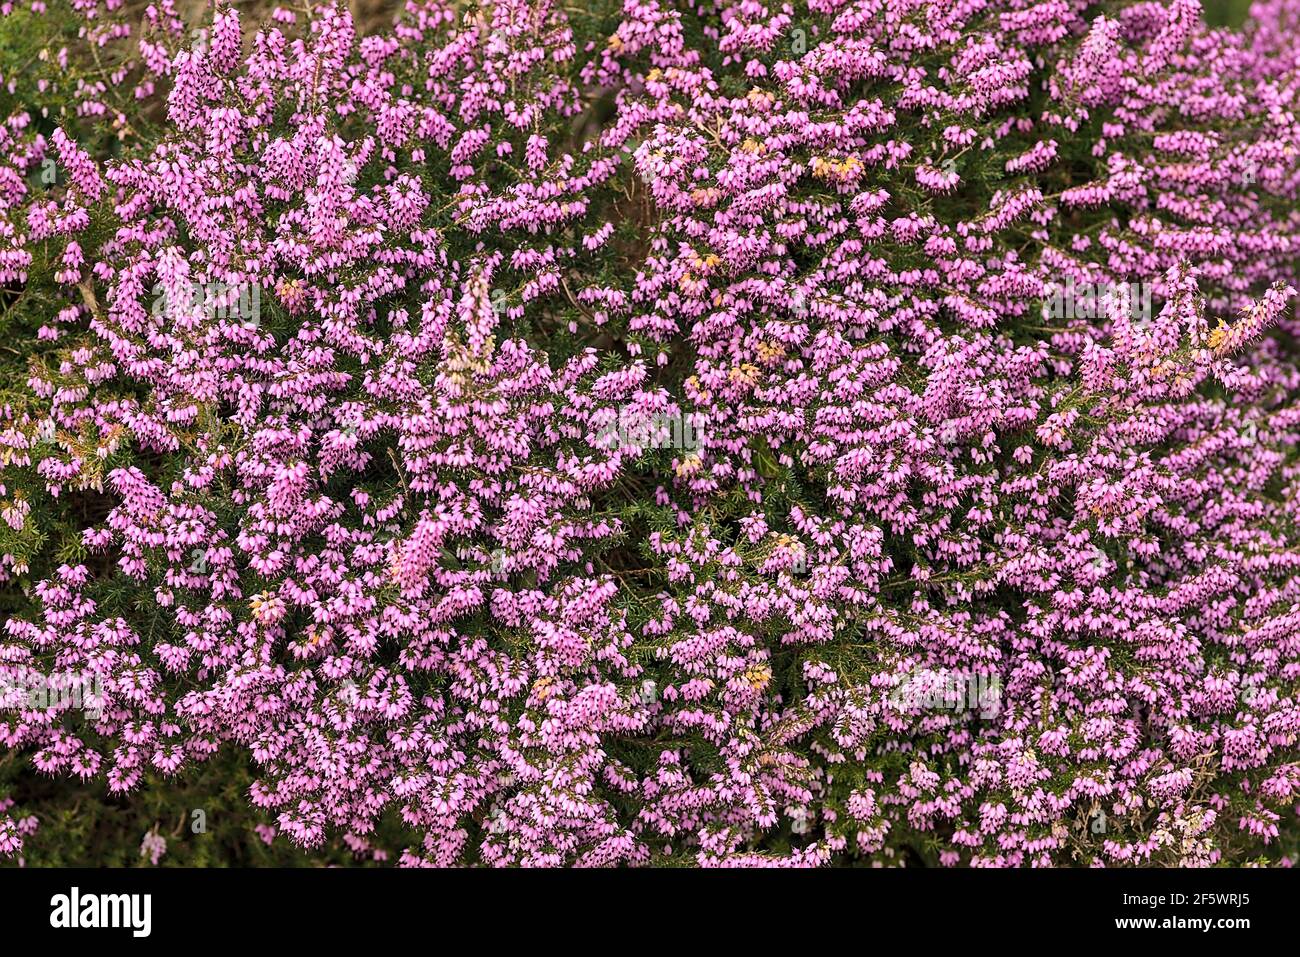 Beautiful uniform background of purple bell shaped heather (Erica cinerea) commonly growing in Great Britain and western Europe. High resolution Stock Photo